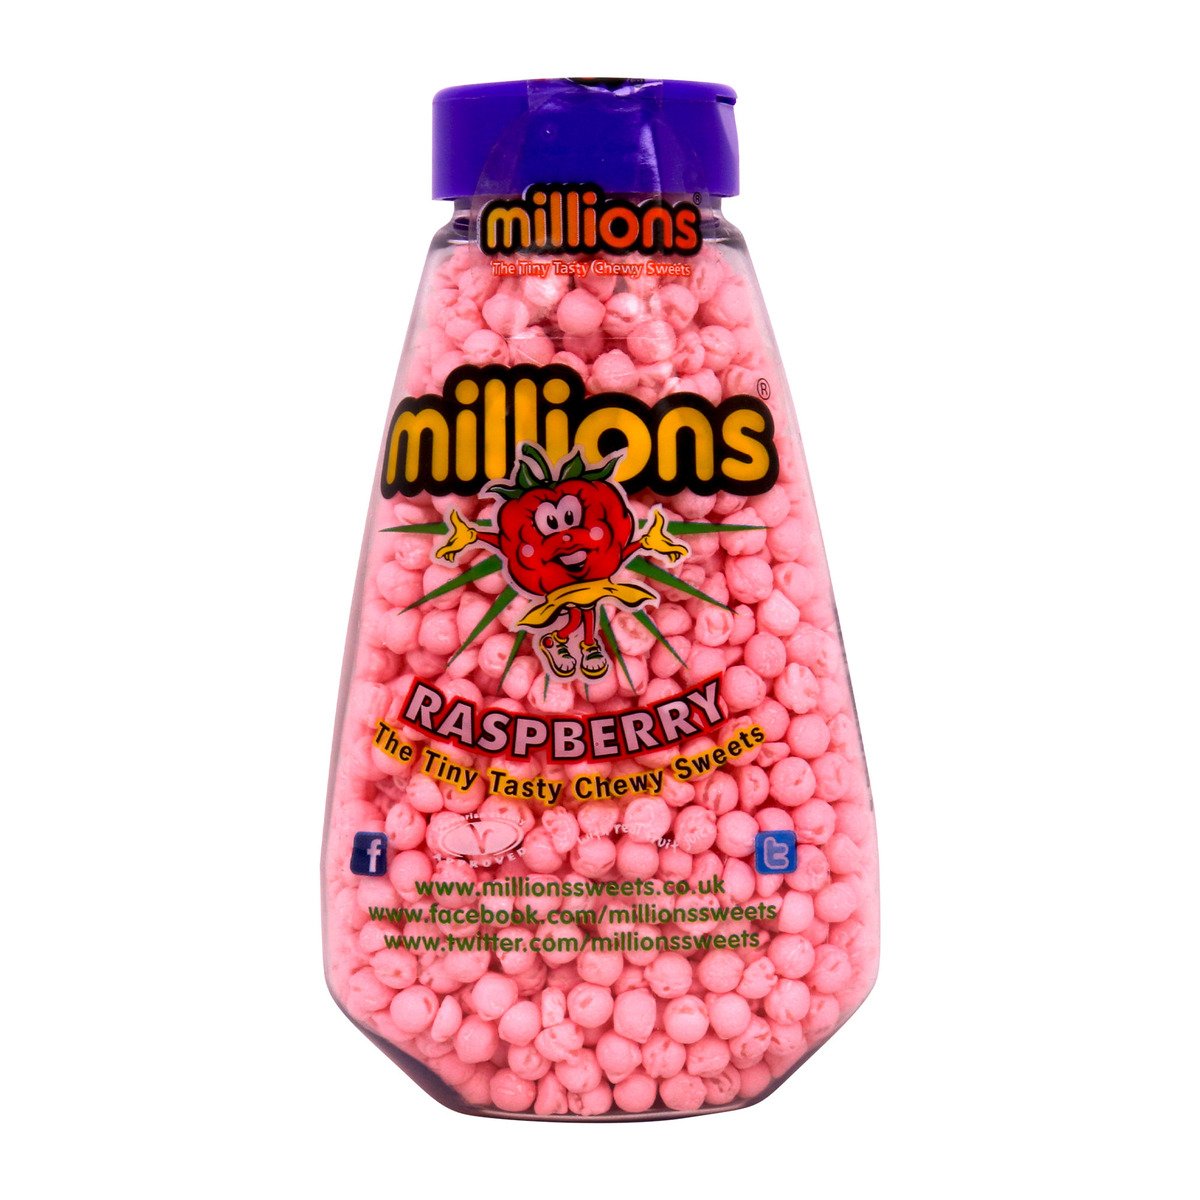 Millions Chewy Sweets Raspberry 227 g